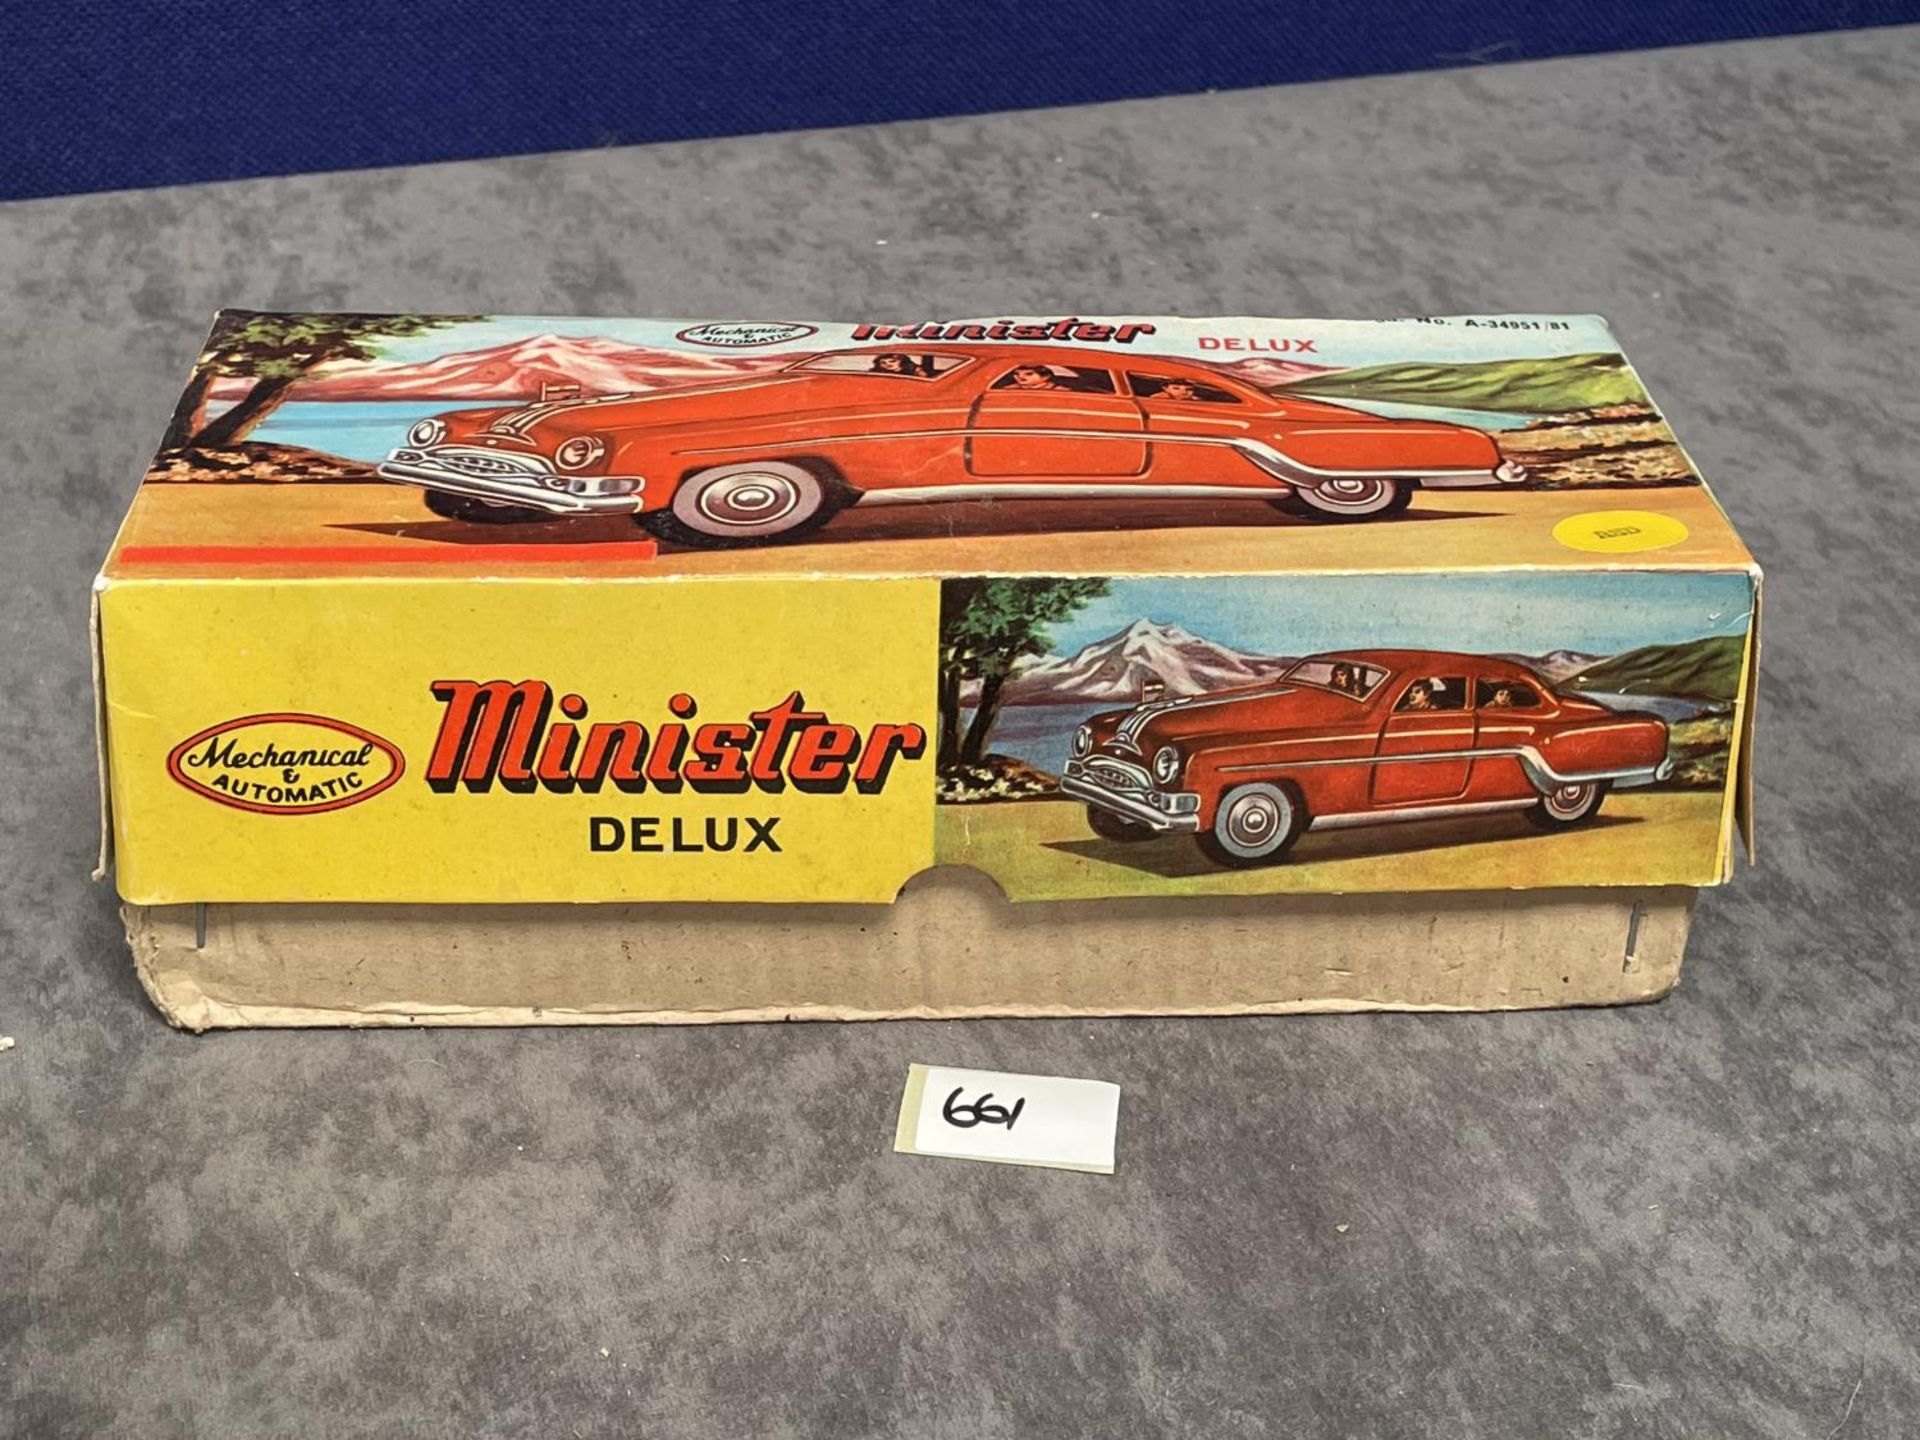 Vintage Mechanical & Automatic Minister Delux Pontiac Tin Red Car A-34951/81 1:2, Car And Box